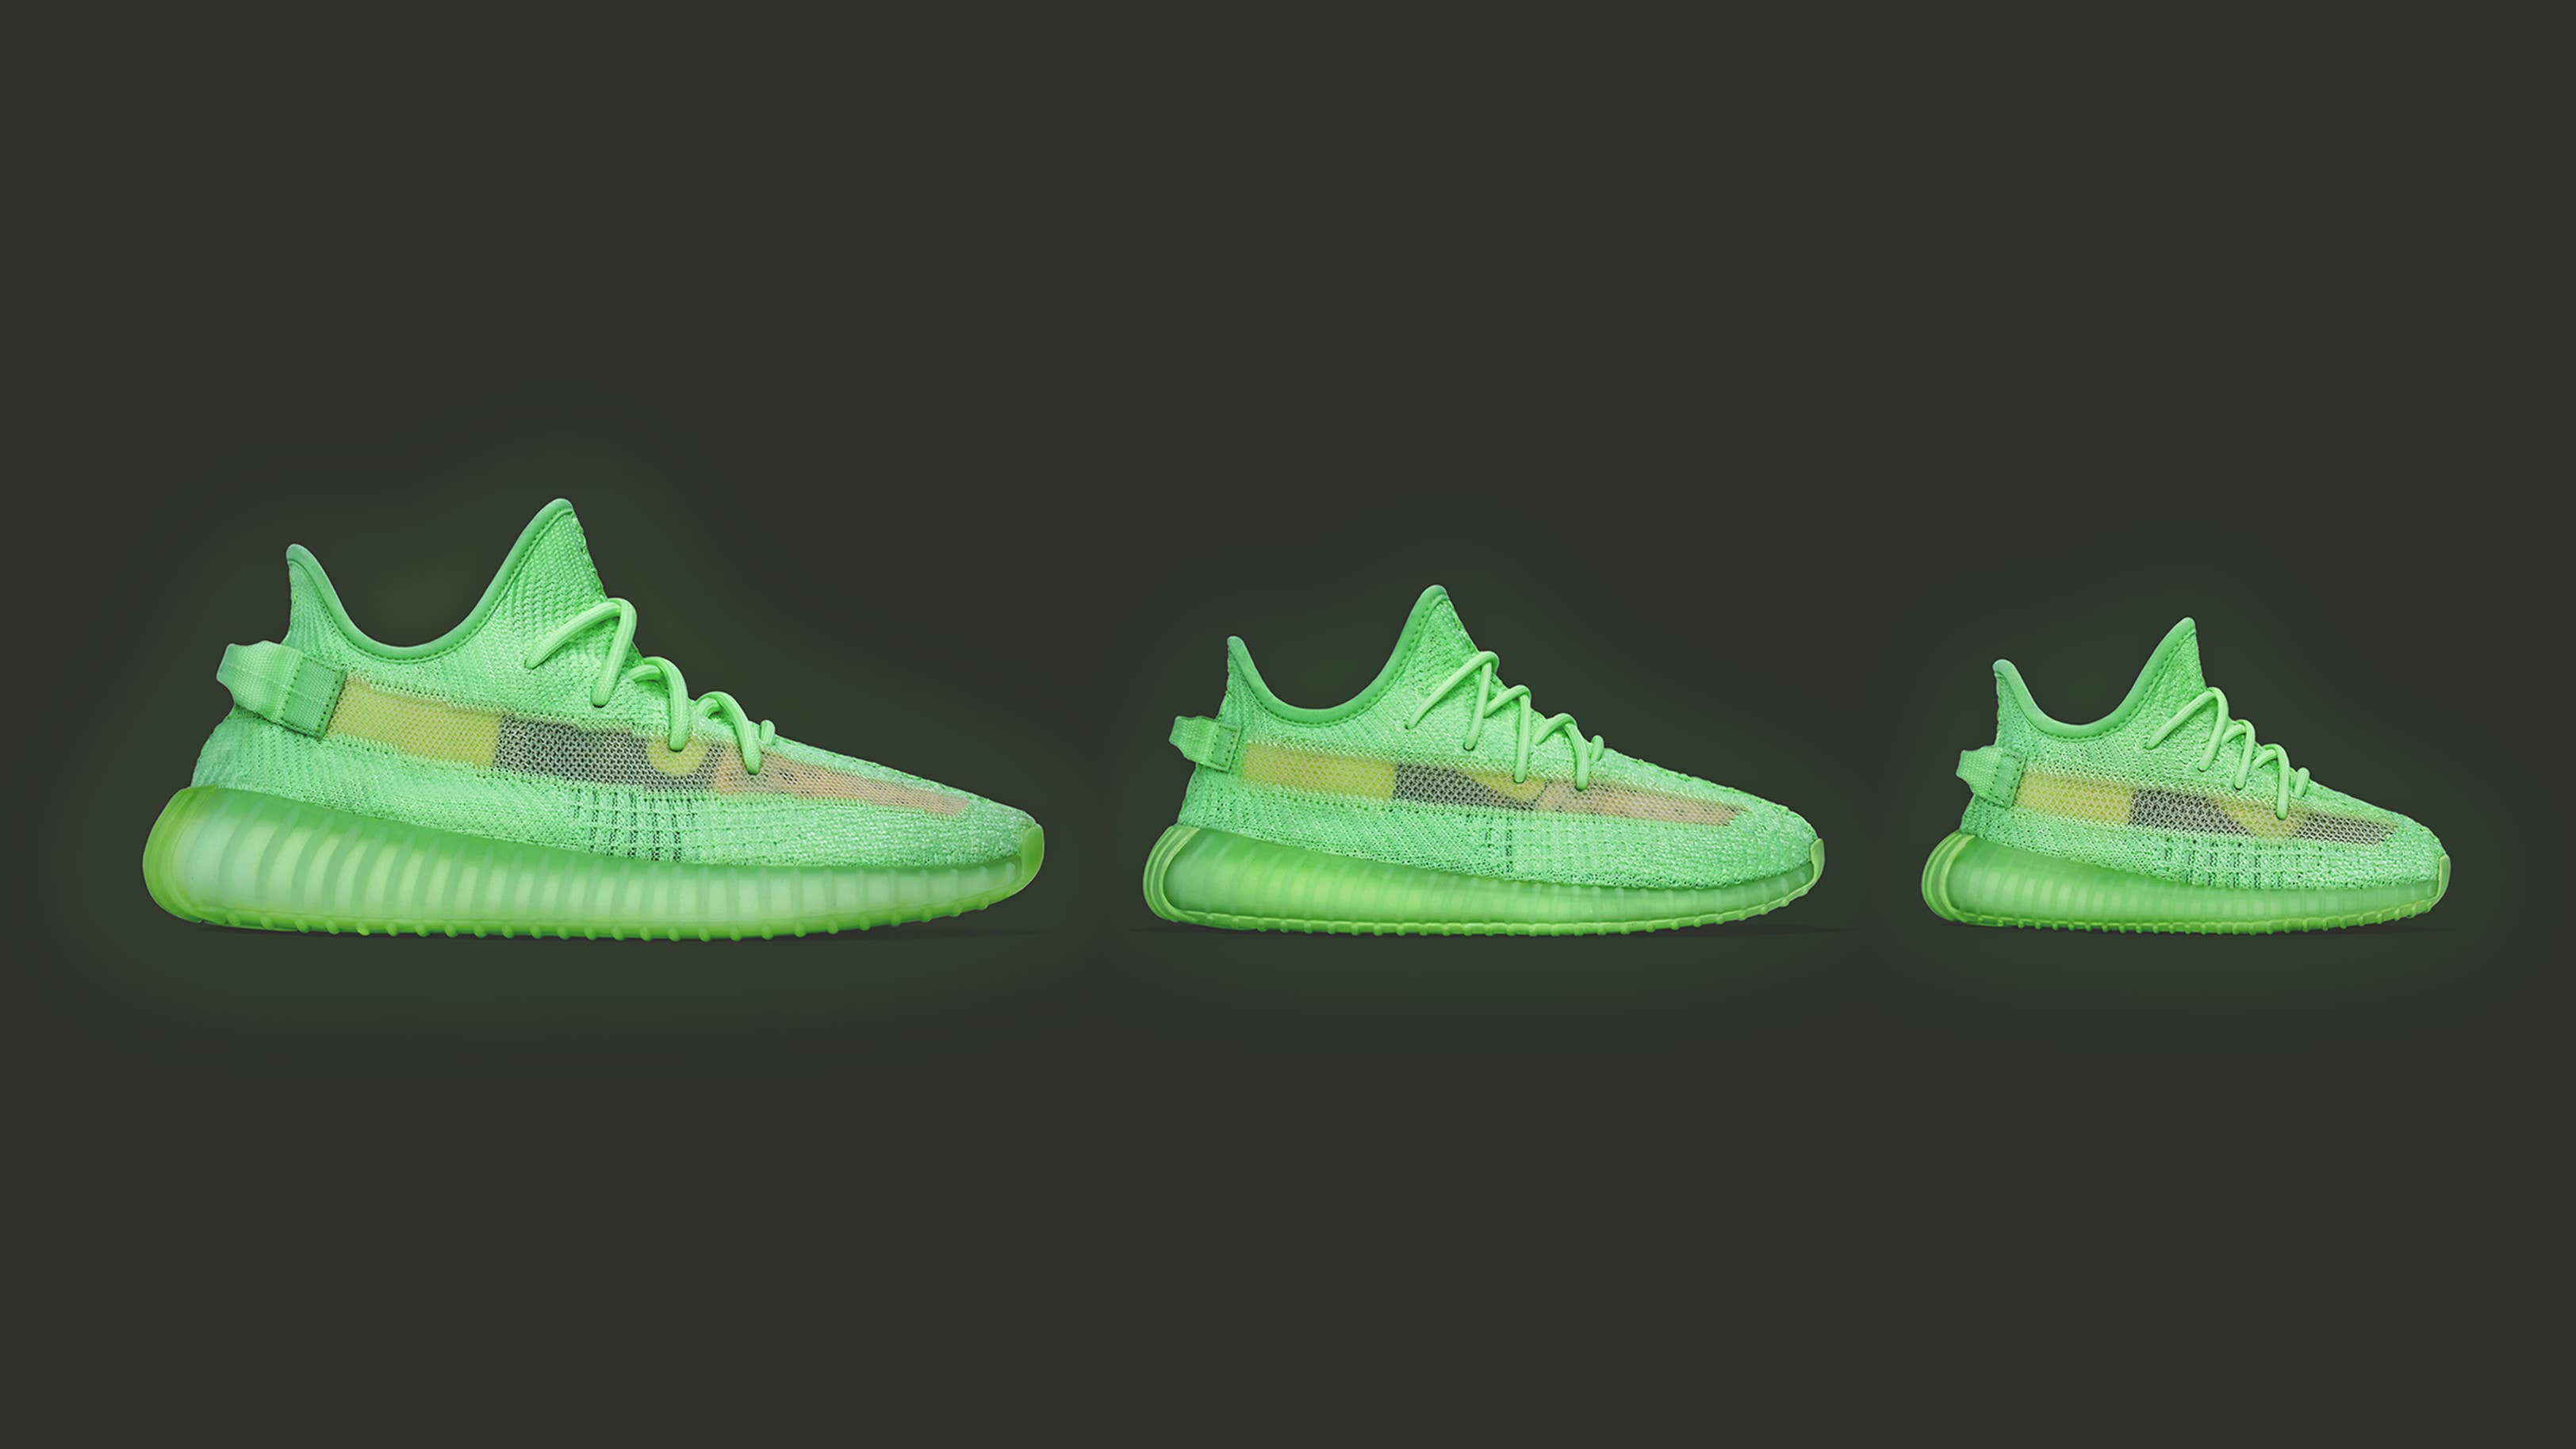 adidas Yeezy Boost 350 V2 Colorways, Release Dates, Pricing